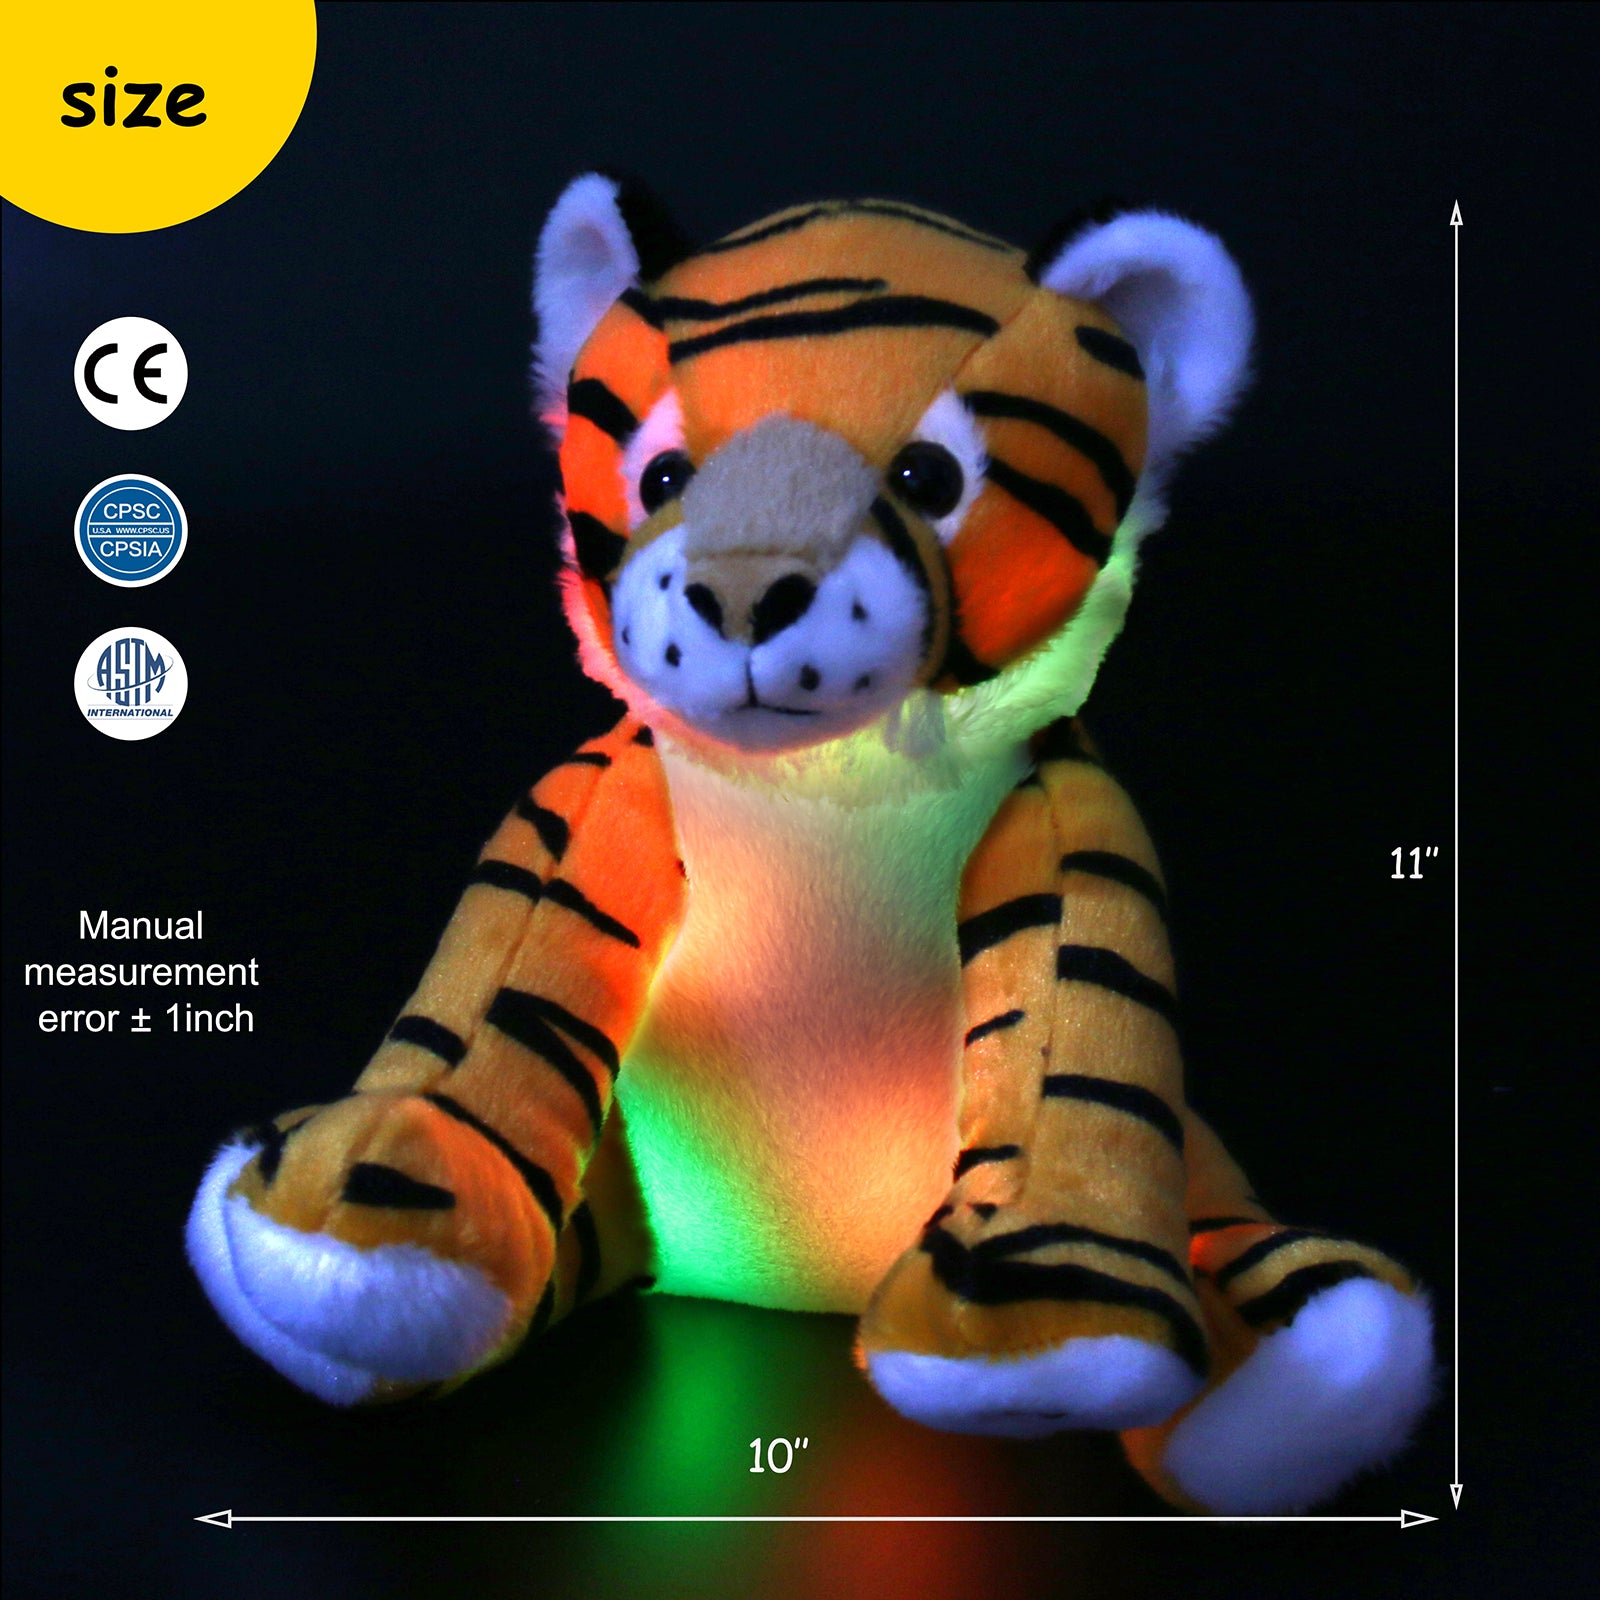 Athoinsu Light up Tiger Stuffed Animals Birthday for Toddlers Kids, 11'' - Glow Guards